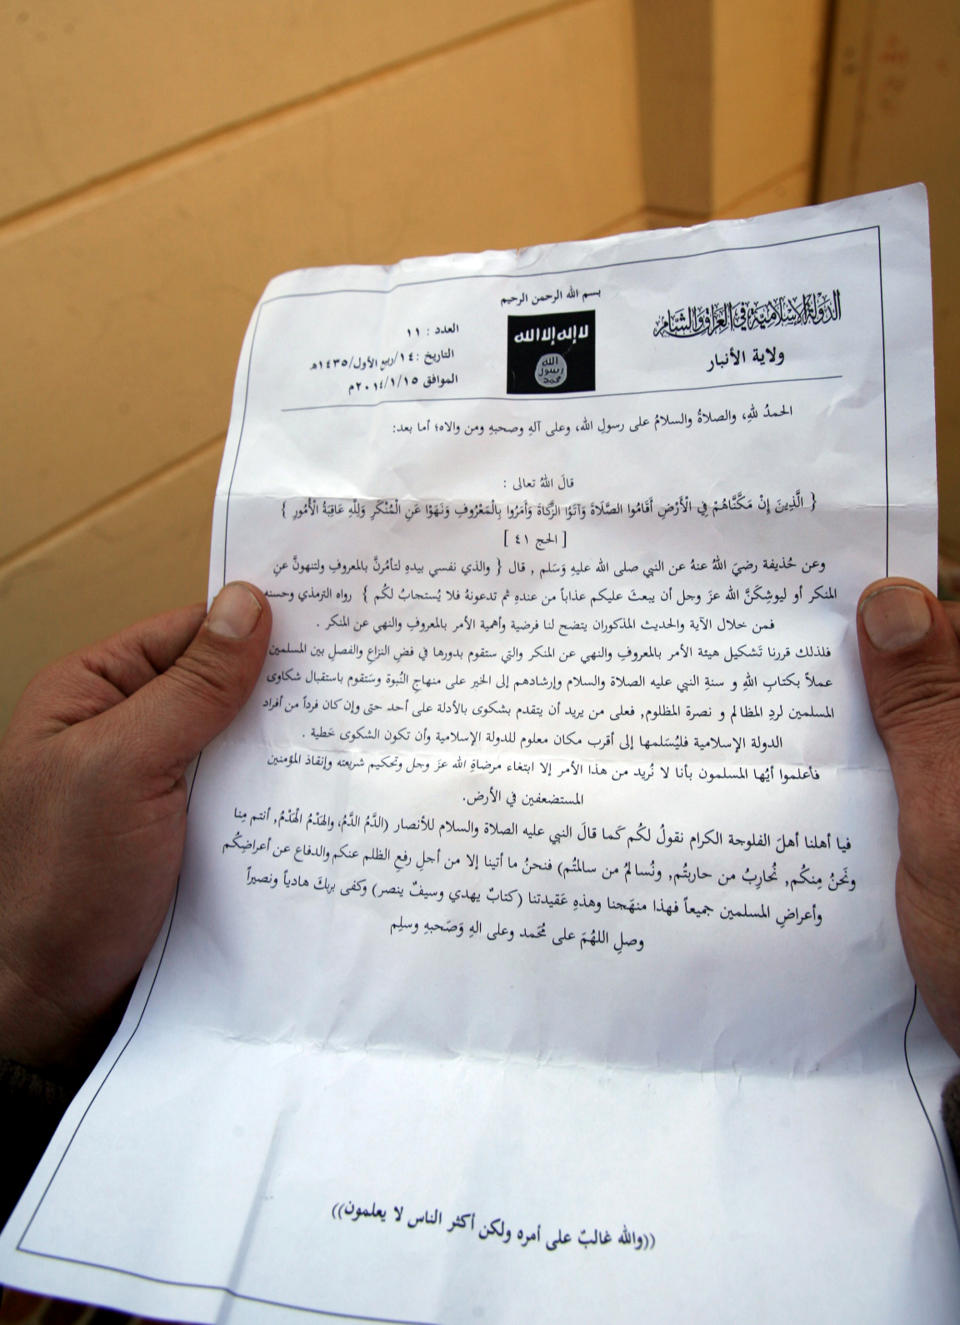 A man reads a pamphlet issued by al-Qaida-linked militants in Fallujah, Iraq, Thursday, Jan. 16, 2014. Members of al-Qaida's local franchise handed out pamphlets urging residents in the western city of Fallujah to take up arms and back the militants in their weeks-long fight against Iraqi troops as clashes raged on around the city, residents said Thursday. (AP Photo)